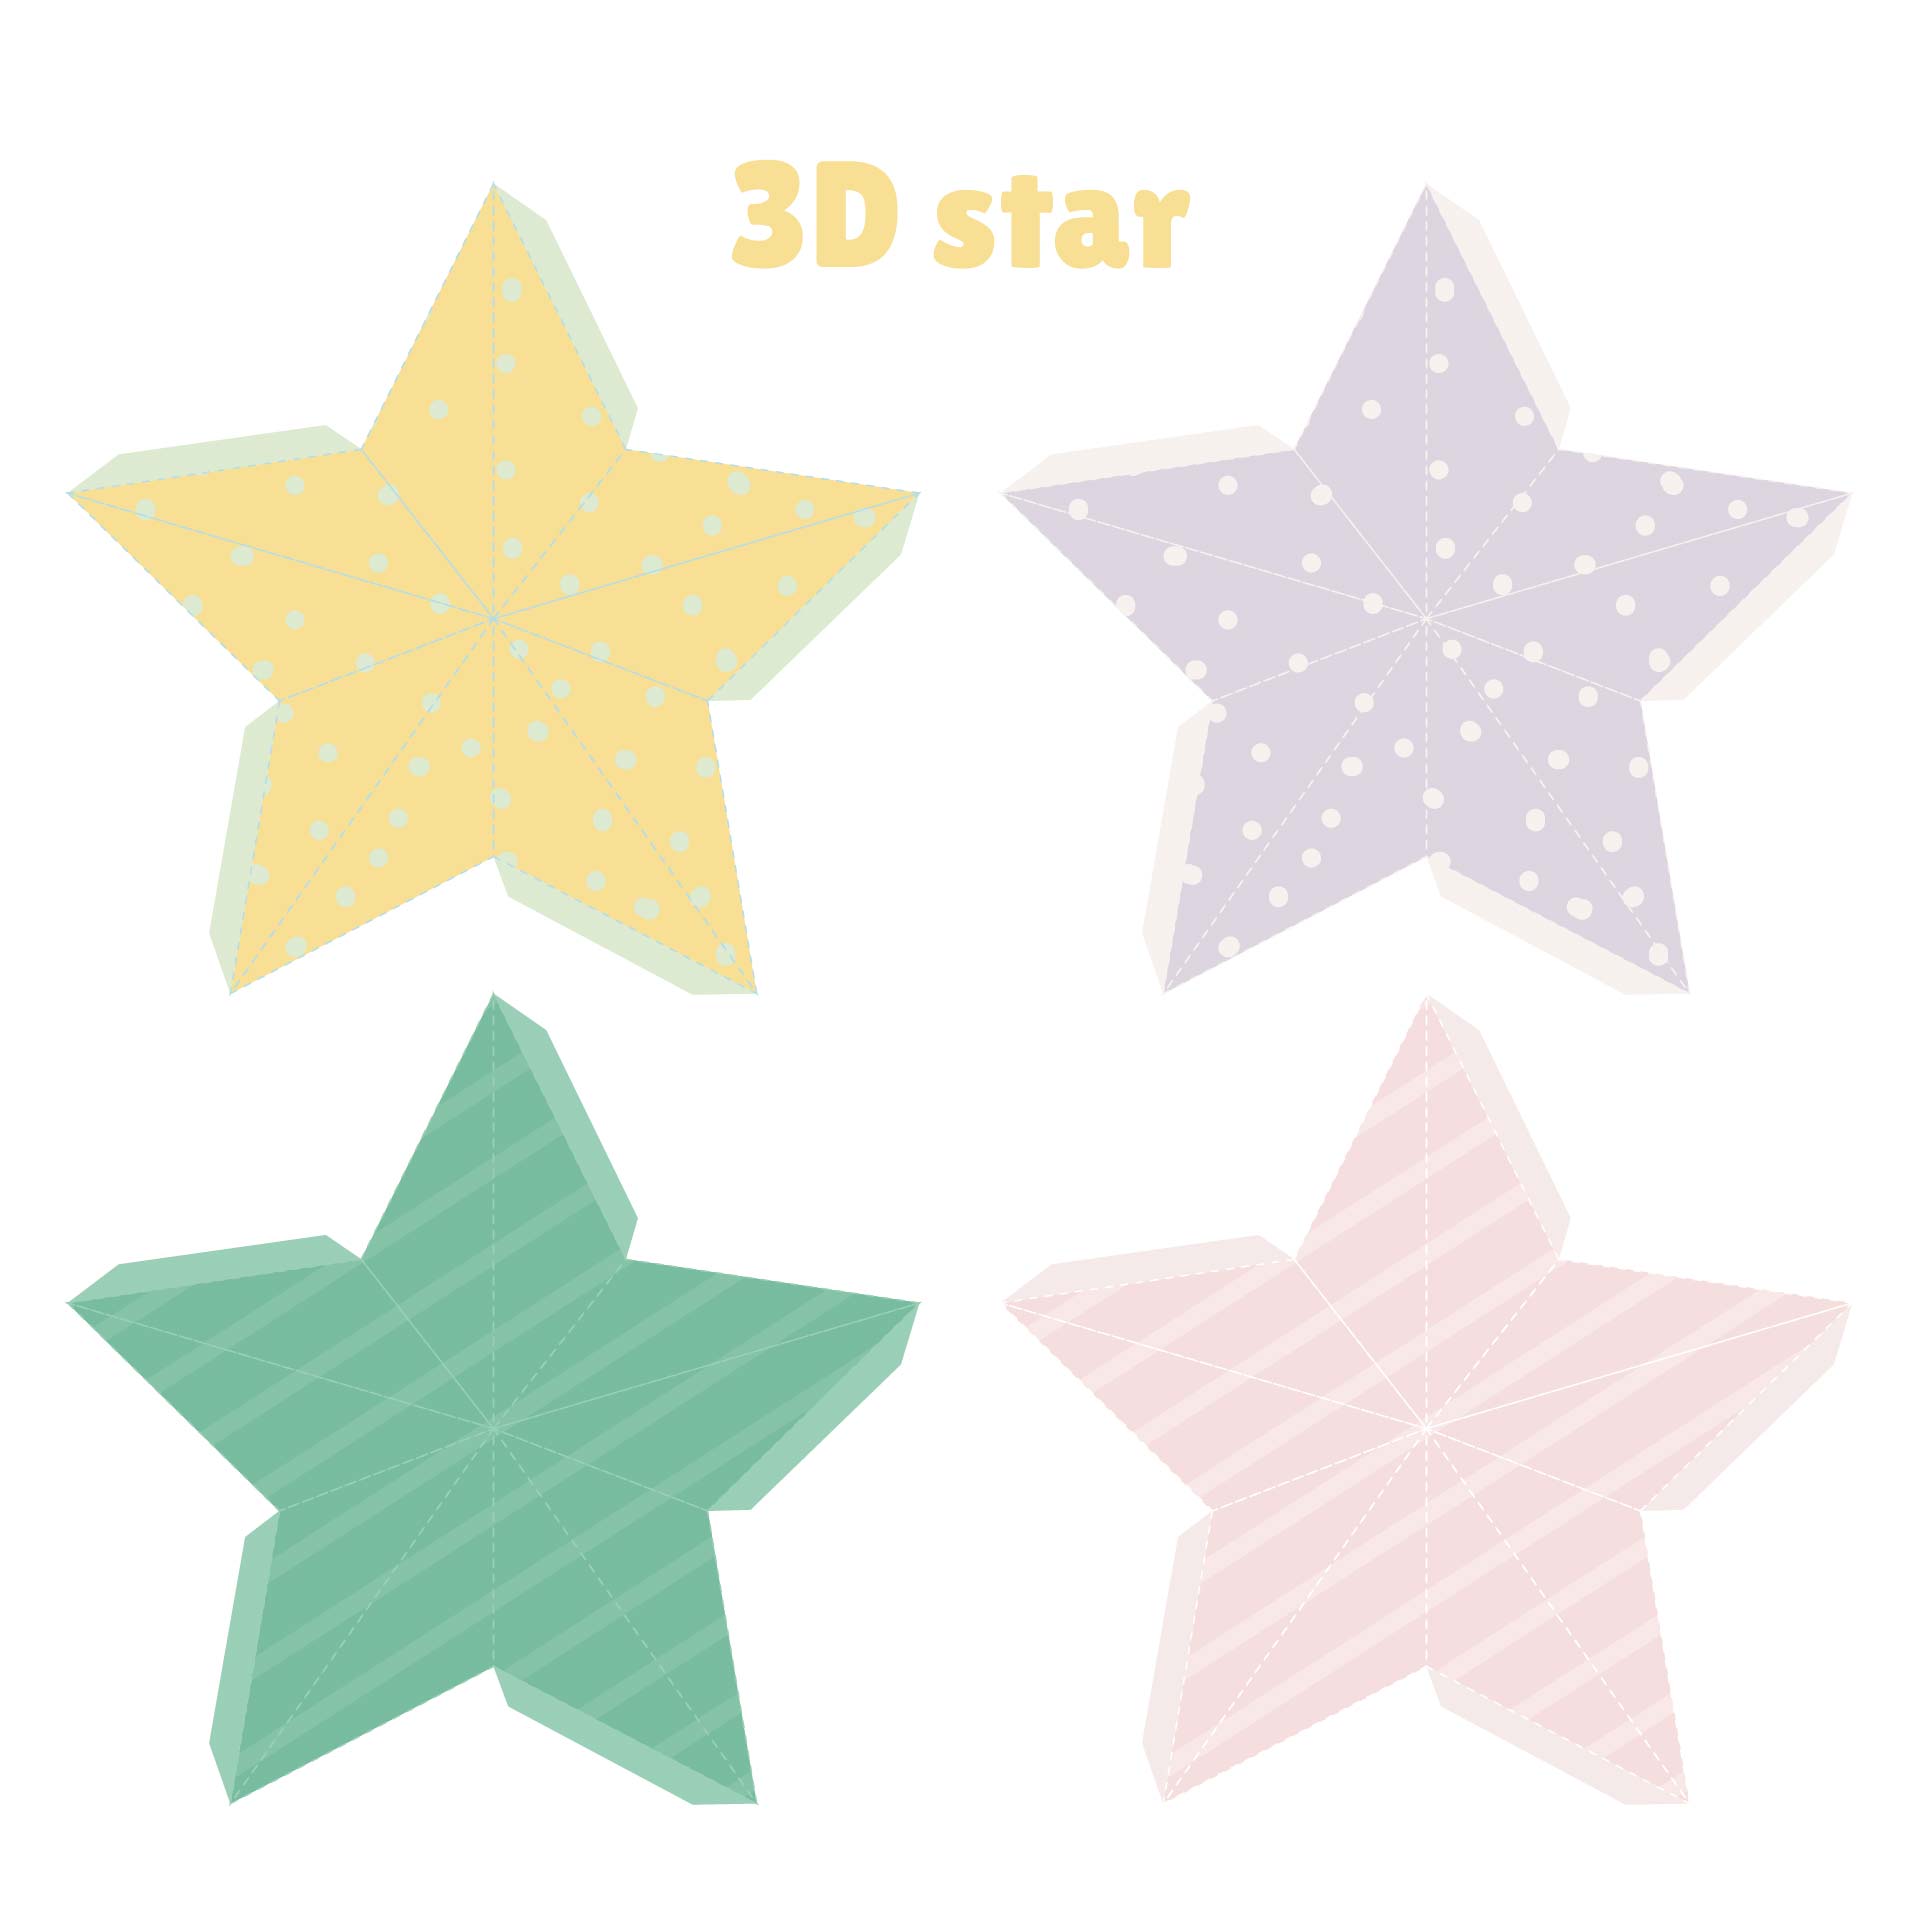 5-best-images-of-3d-star-printable-template-3d-christmas-star